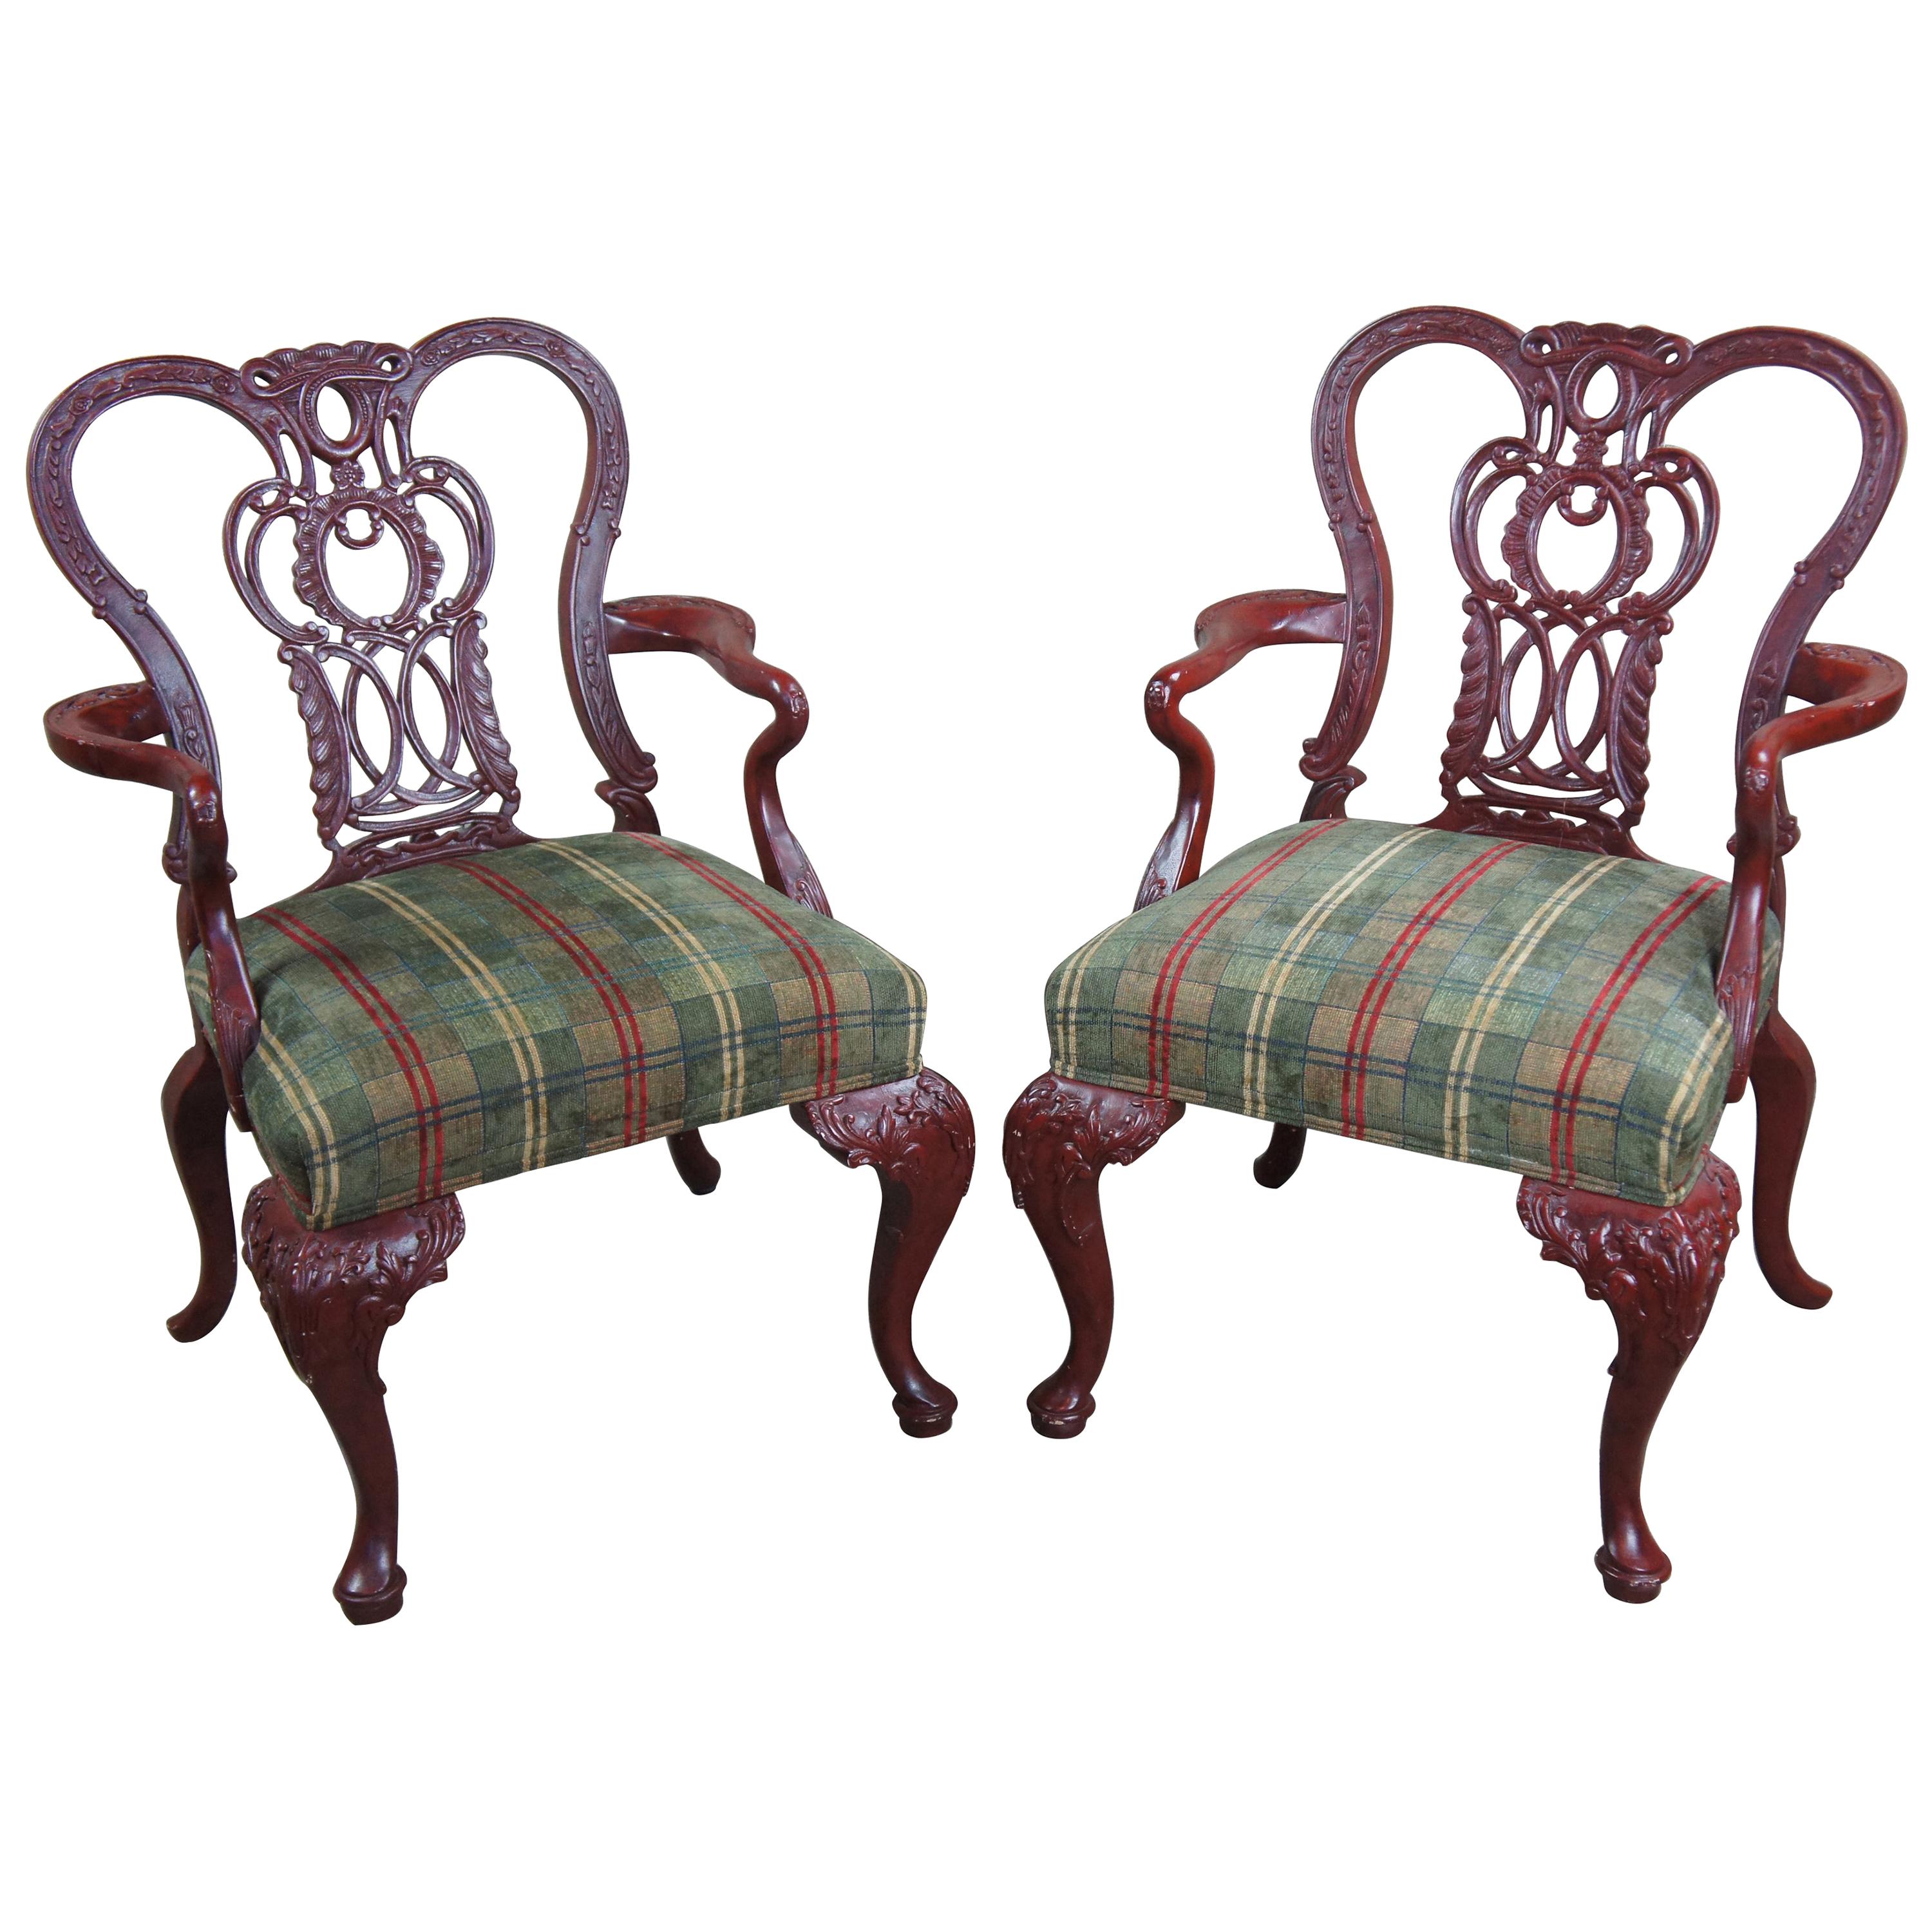 2 Vintage Century Furniture Chippendale Gooseneck Red Mahogany Arm Accent Chairs